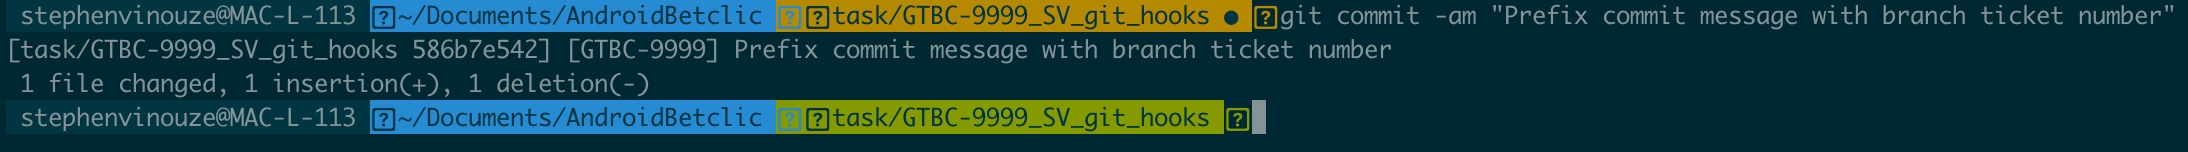 Git commit message was prefixed with [GTBC-9999]